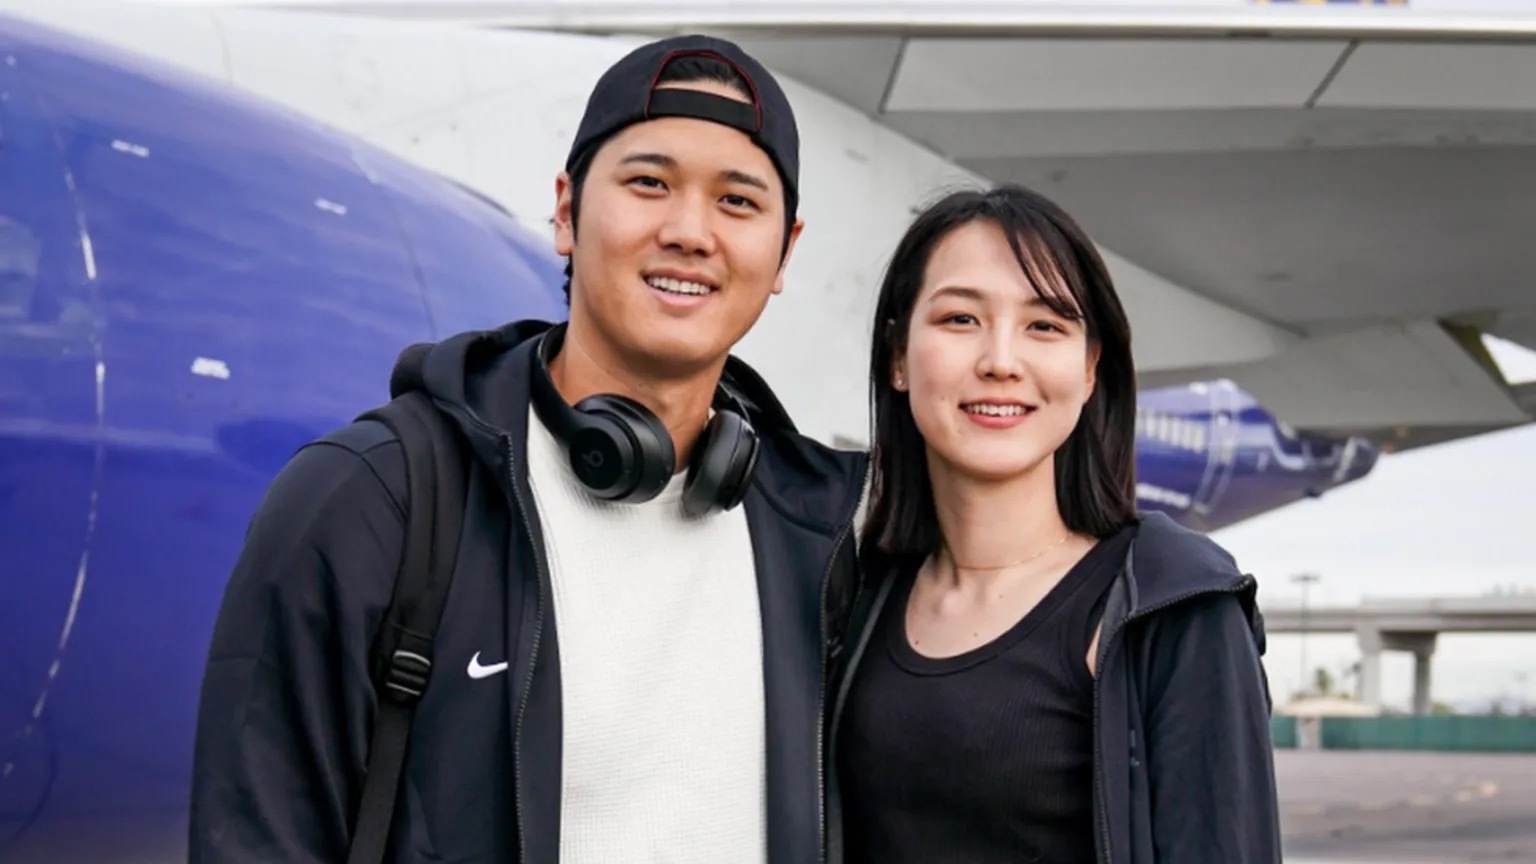 “Shohei Ohtani and Wife Radiate Happiness in Pre-Flight Photo”